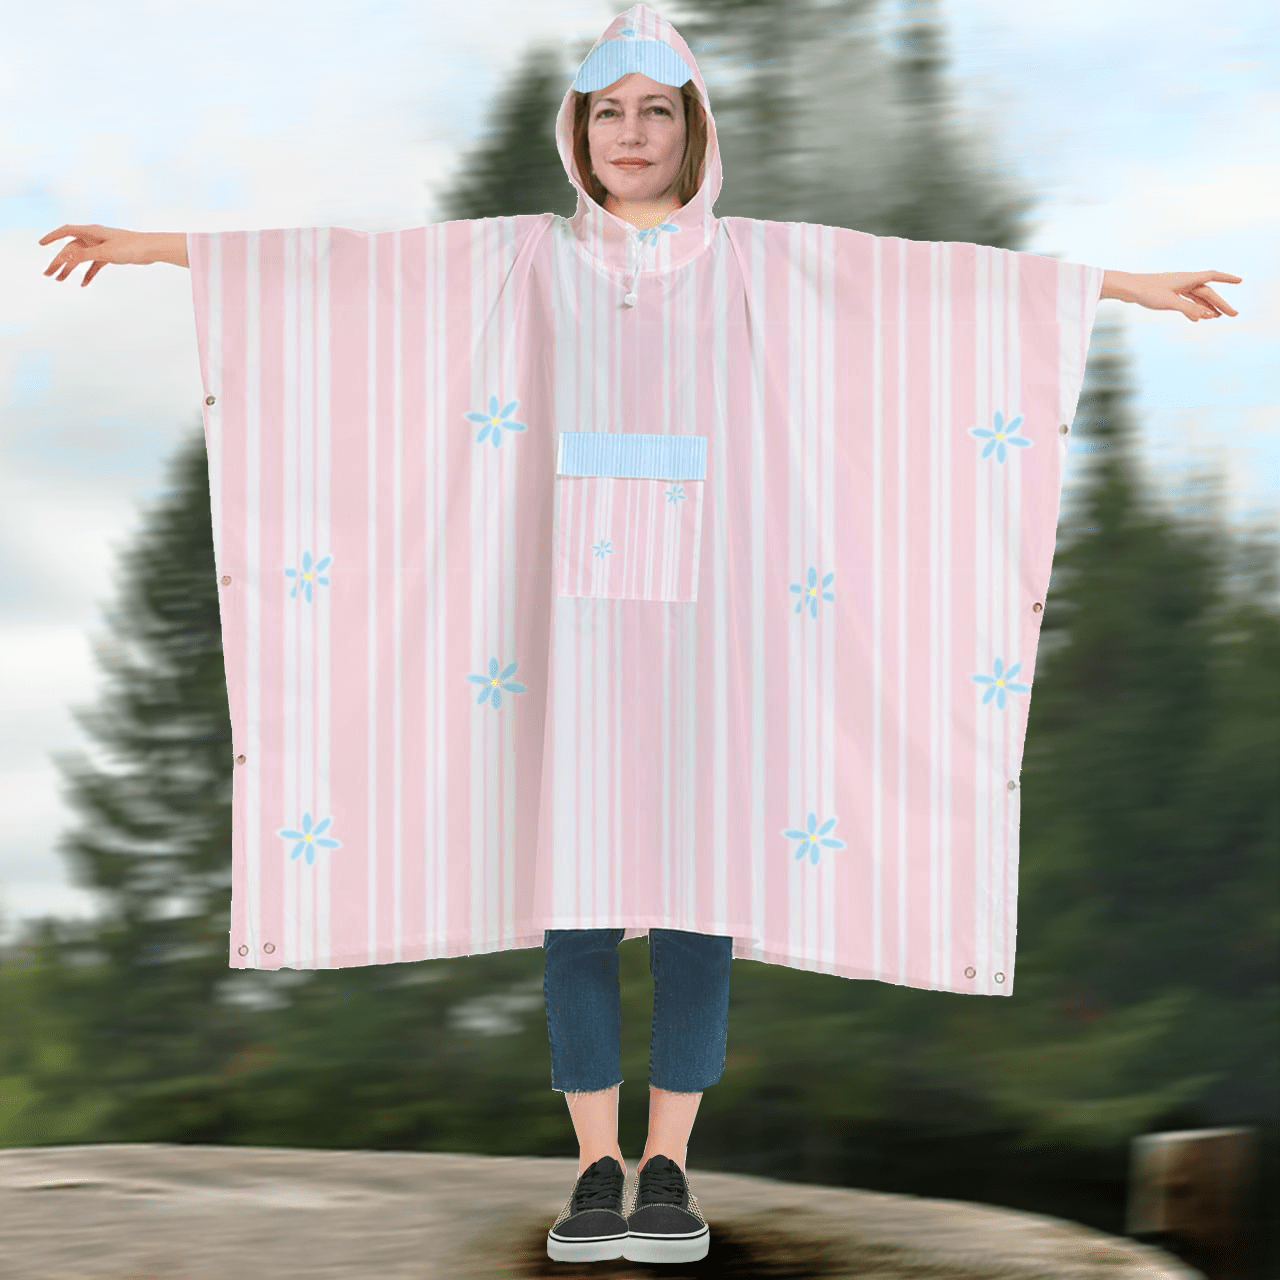 the-wheaten-store-women-s-hooded-rain-poncho-pink-and-blue-fulldress-one-size-33000414707909